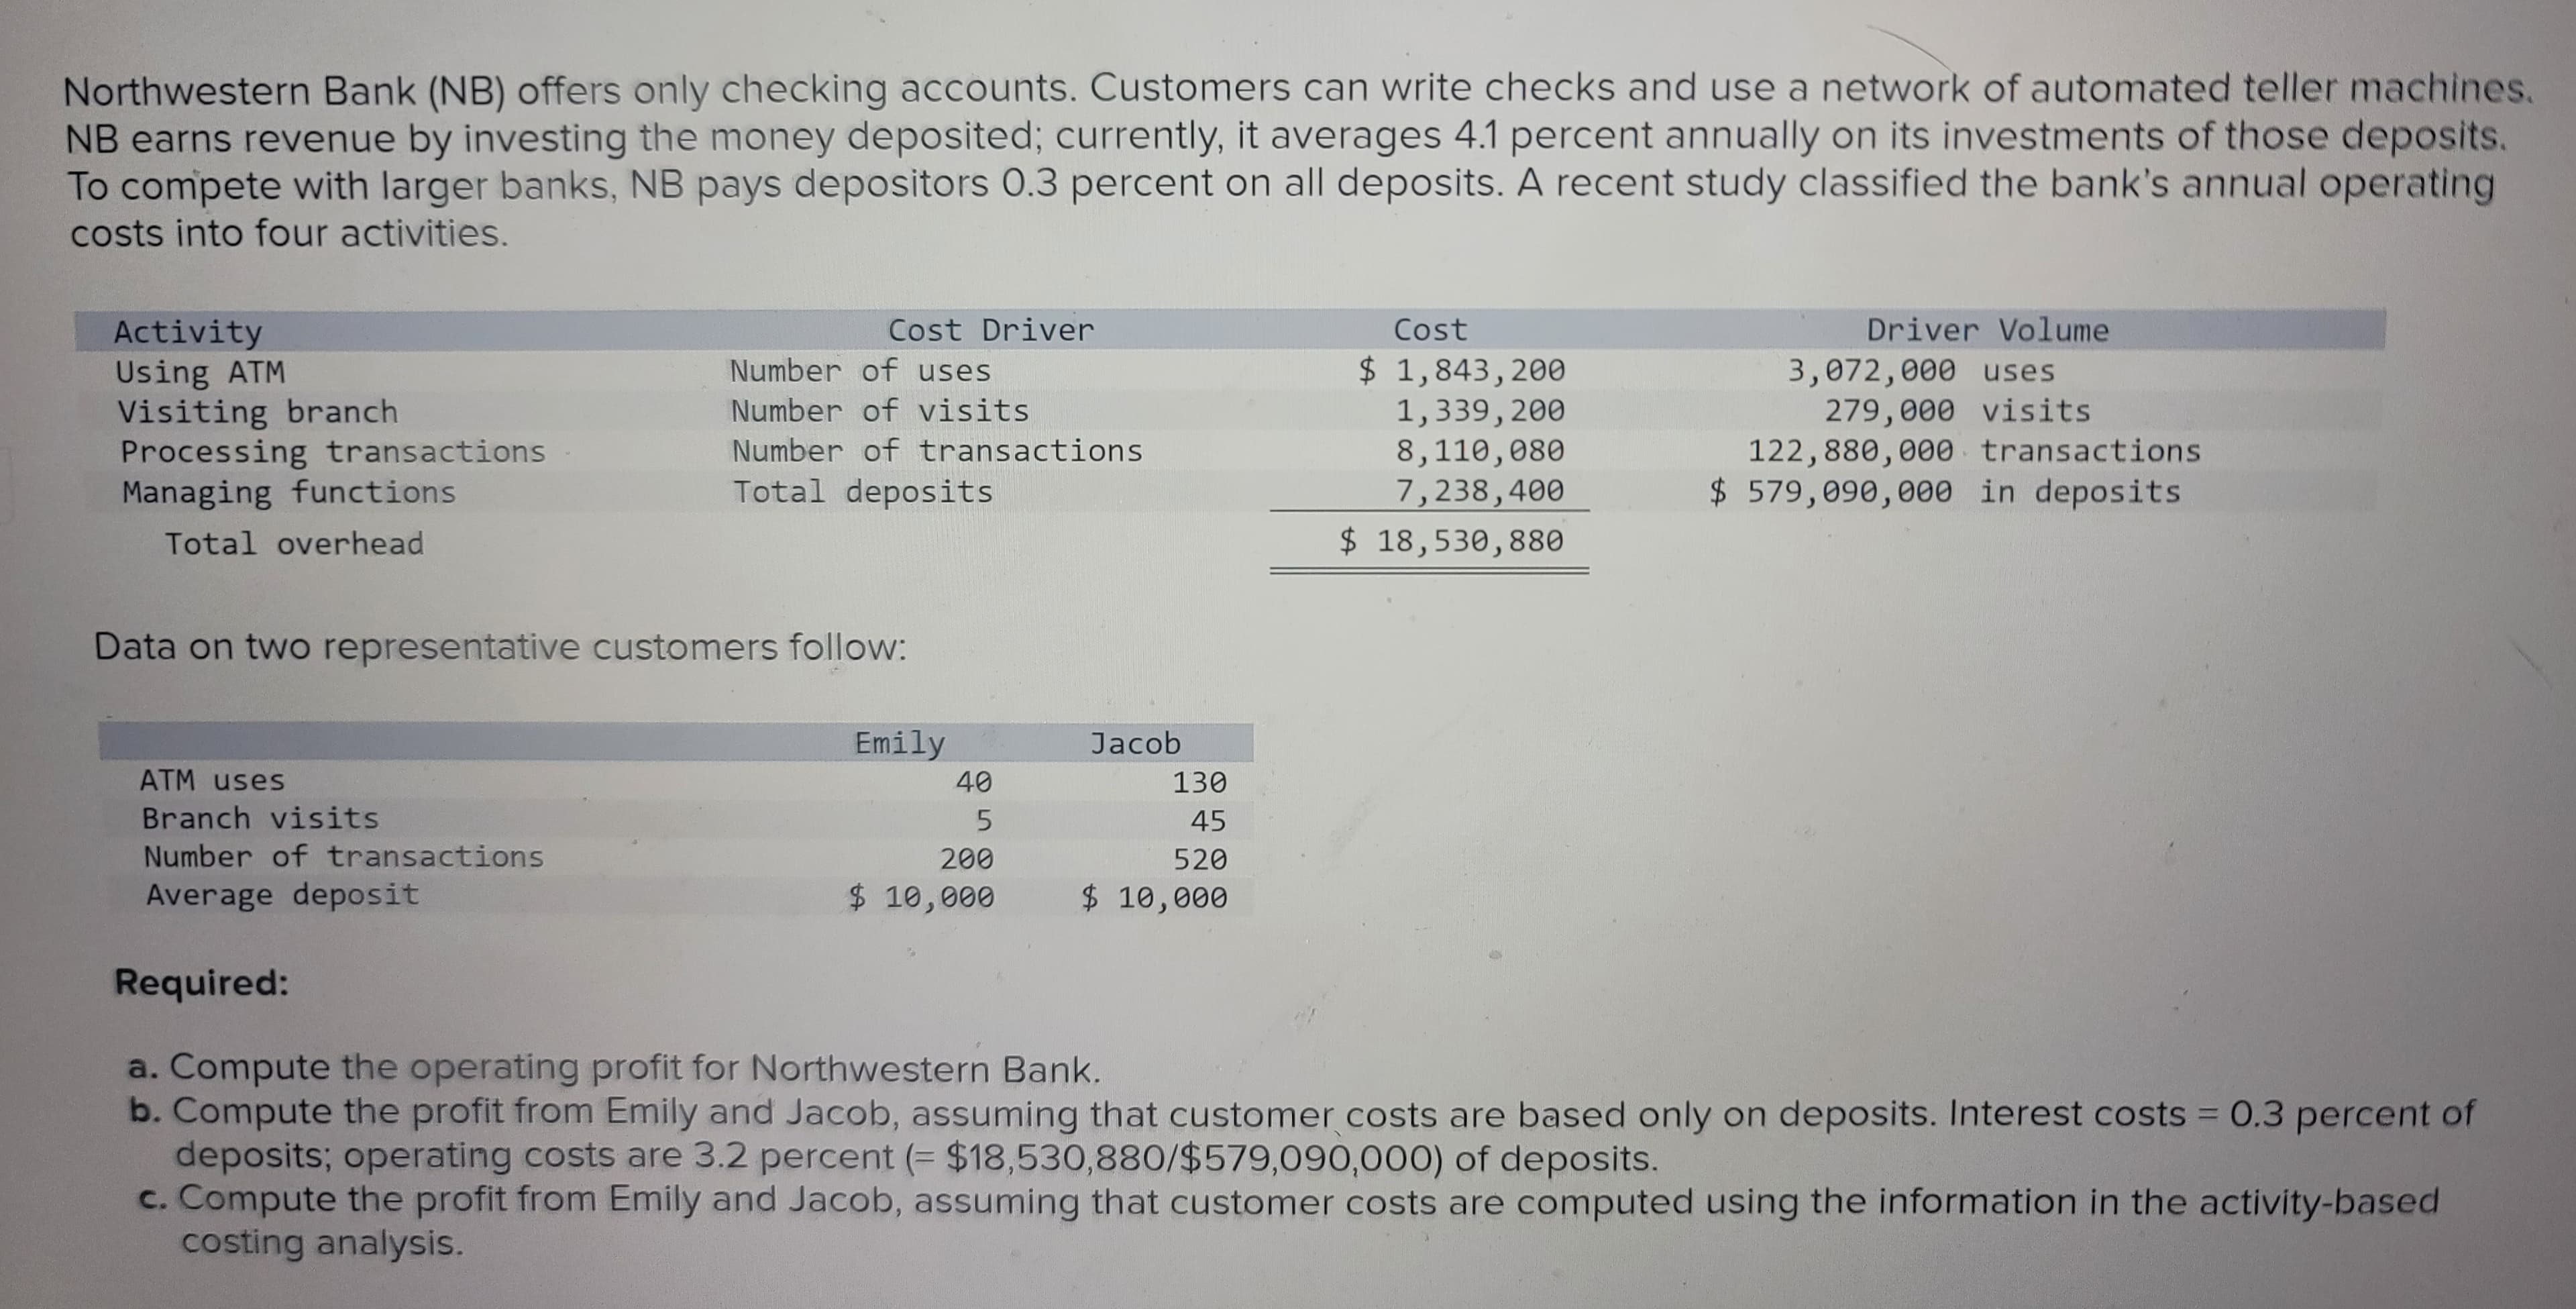 Northwestern Bank (NB) offers only checking accounts. Customers can write checks and use a network of automated teller machines.
NB earns revenue by investing the money deposited; currently, it averages 4.1 percent annually on its investments of those deposits.
To compete with larger banks, NB pays depositors 0.3 percent on all deposits. A recent study classified the bank's annual operating
costs into four activities.
Activity
Using ATM
Visiting branch
Processing transactions
Managing functions
Total overhead
ATM uses
Branch visits
Number of transactions
Average deposit
Cost Driver
Data on two representative customers follow:
Required:
Number of uses
Number of visits
Number of transactions
Total deposits
Emily
40
5
200
$ 10,000
Jacob
130
45
520
$ 10,000
Cost
$ 1,843, 200
1,339, 200
8,110,080
7,238,400
$ 18,530,880
Driver Volume
3,072,000 uses
279,000 visits
122,880,000 transactions
$ 579,090,000 in deposits
a. Compute the operating profit for Northwestern Bank.
b. Compute the profit from Emily and Jacob, assuming that customer costs are based only on deposits. Interest costs = 0.3 percent of
deposits; operating costs are 3.2 percent (= $18,530,880/$579,090,000) of deposits.
c. Compute the profit from Emily and Jacob, assuming that customer costs are computed using the information in the activity-based
costing analysis.